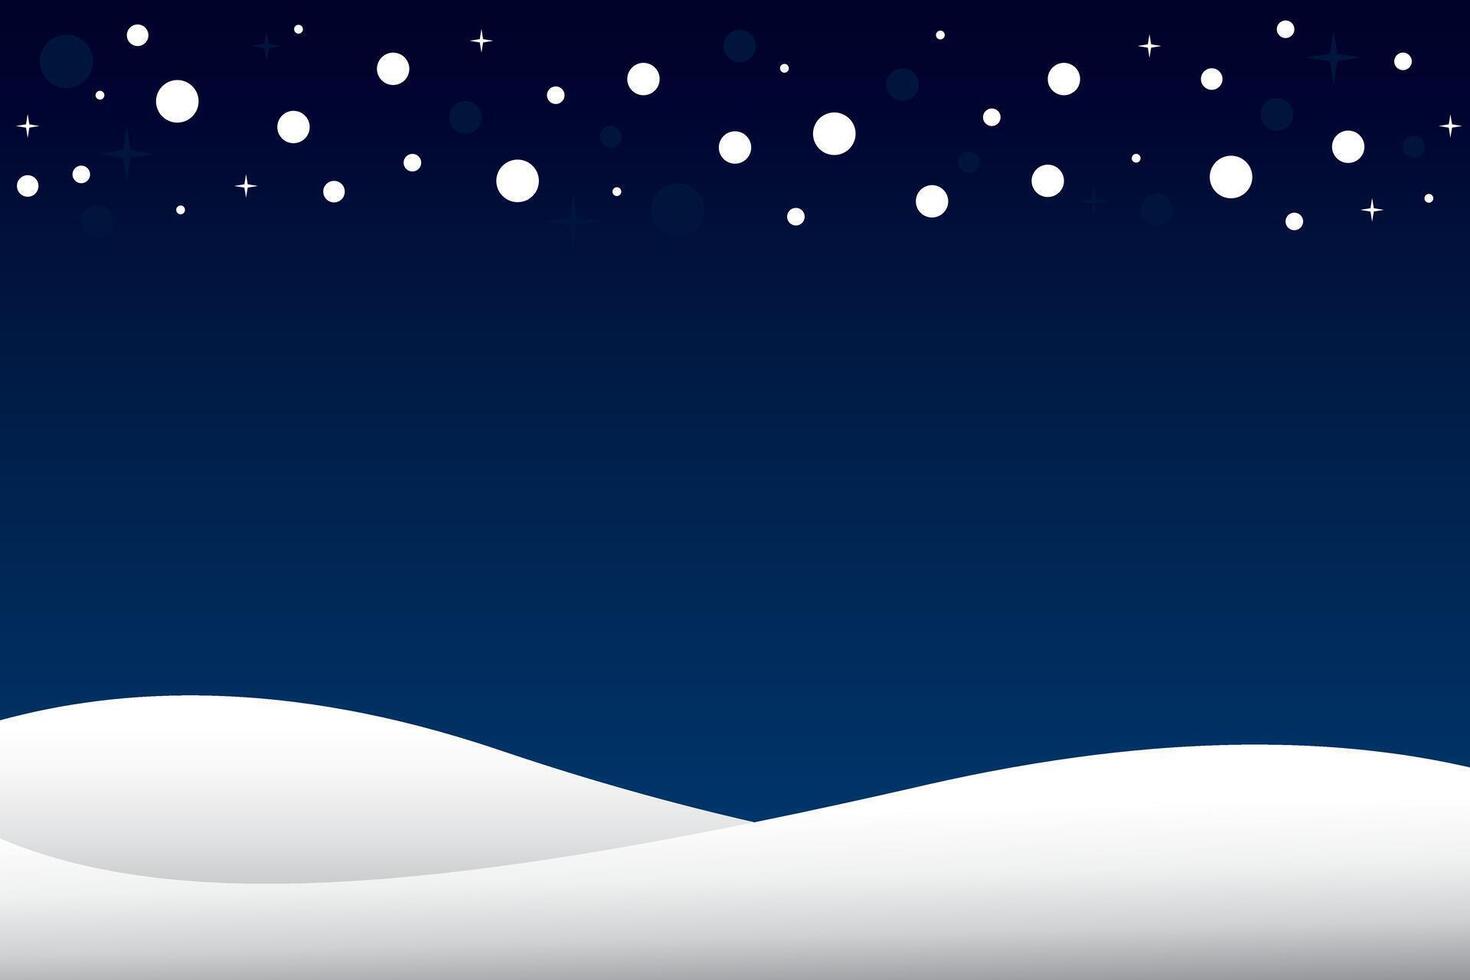 Sparkle winter night abstract background. vector